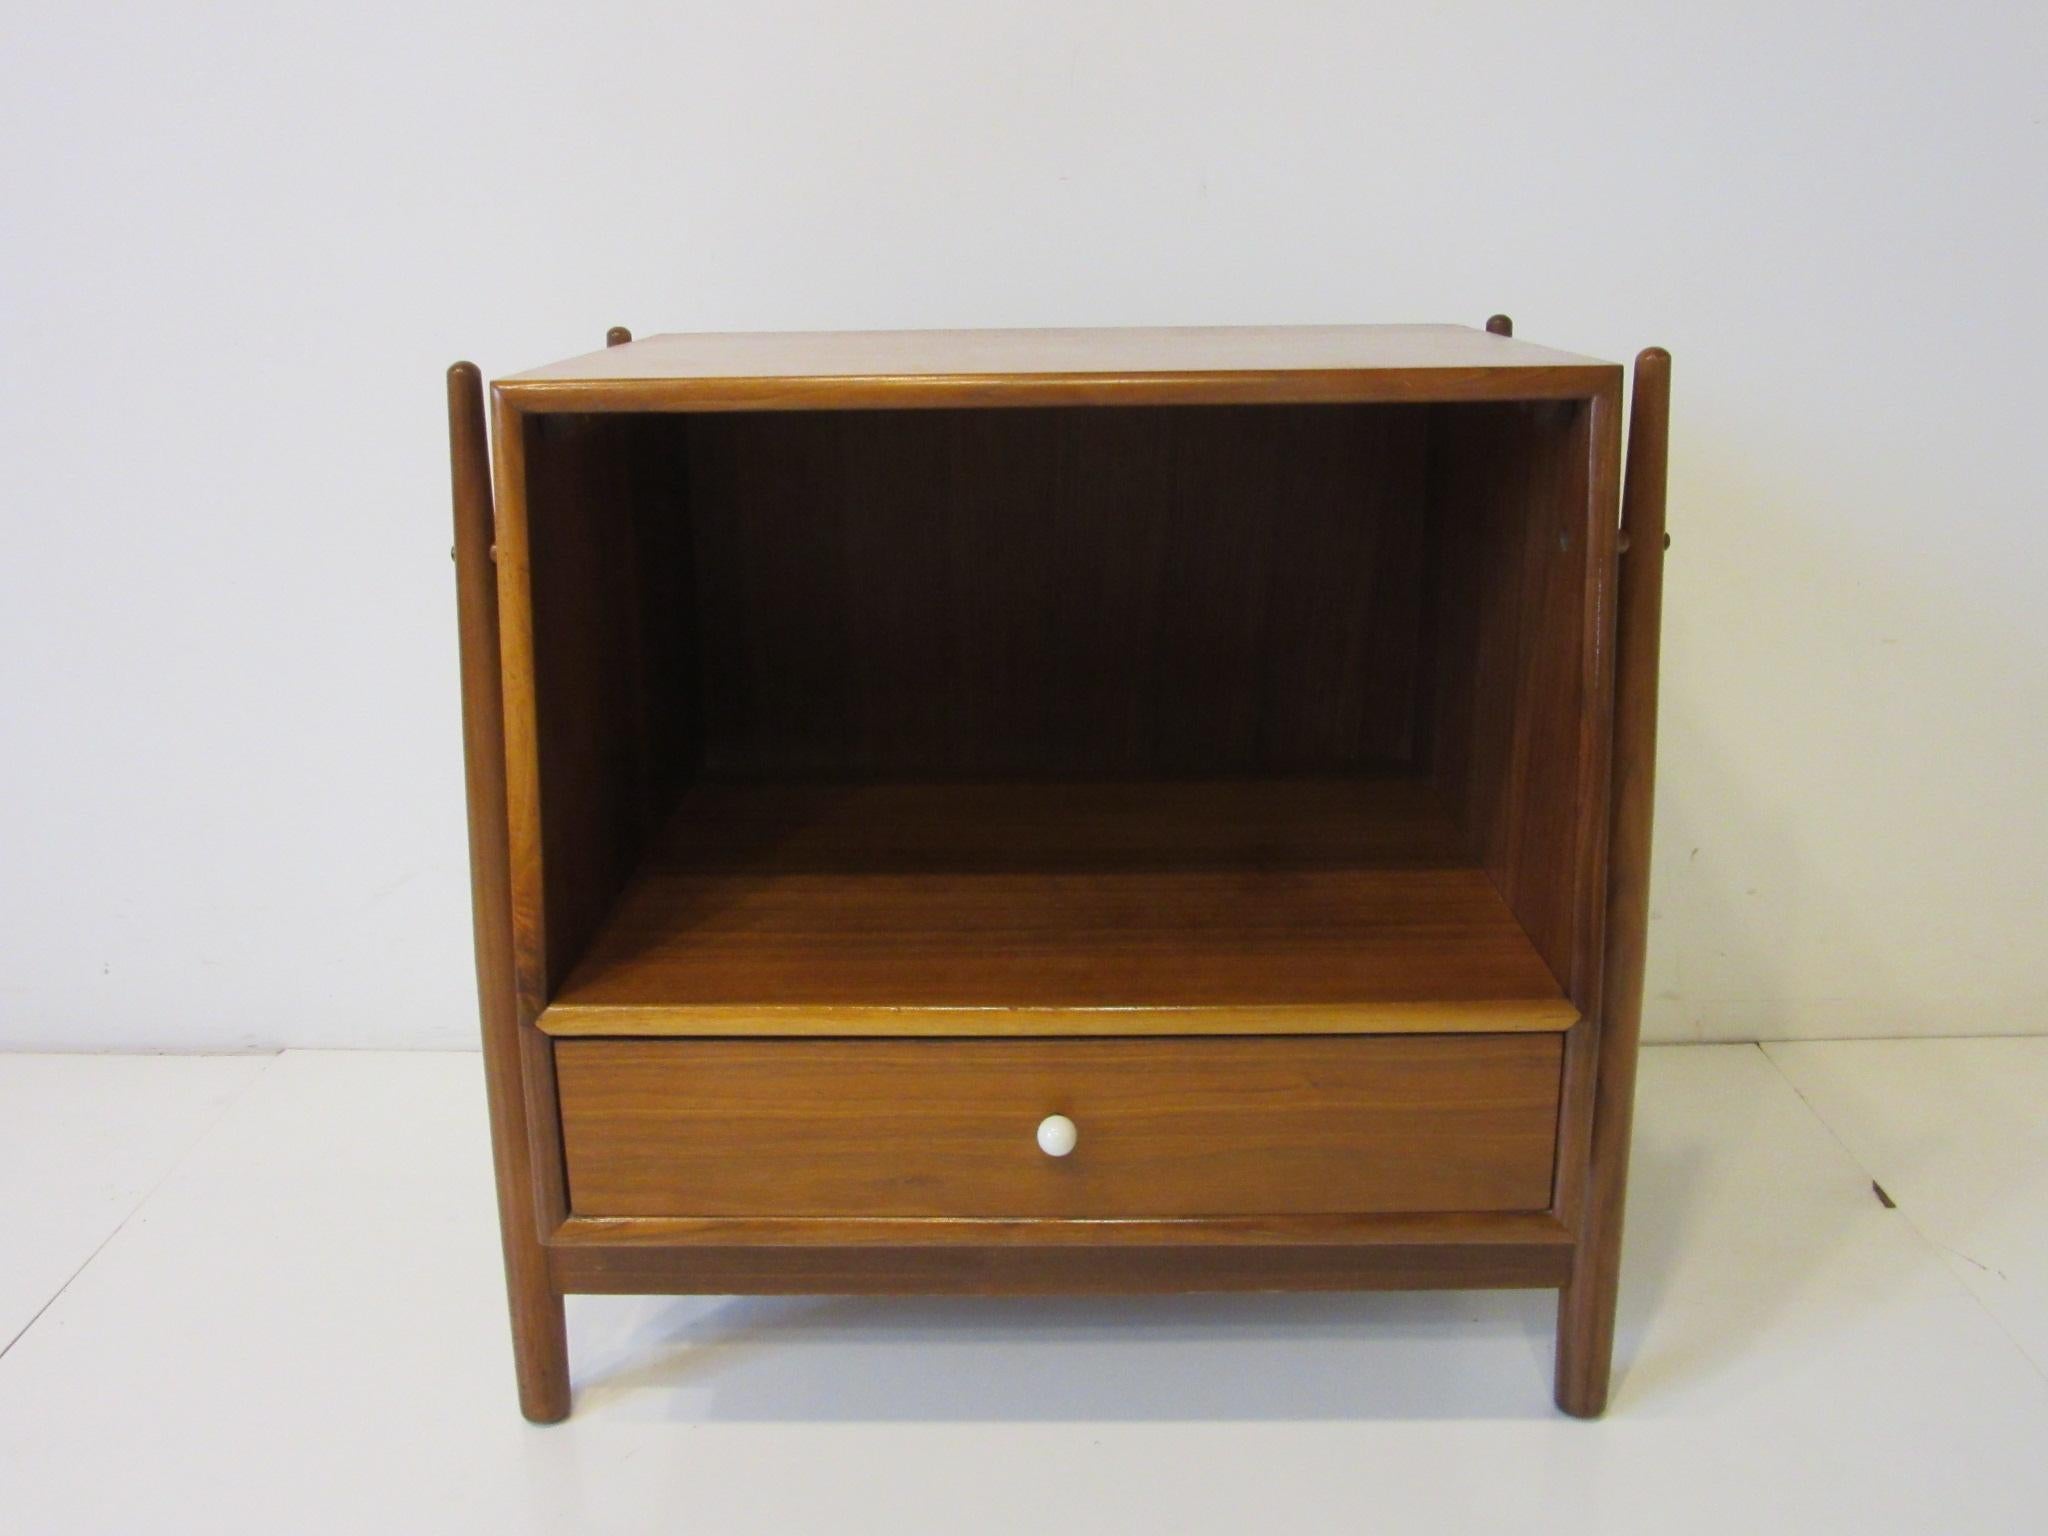 A well designed nightstand having one-drawer with a divider suspended on outer tapered legs and detailed with a white porcelain pull. The upper section offers storage, designed by Kipp Stewart for the Drexel Furniture company for their Declaration